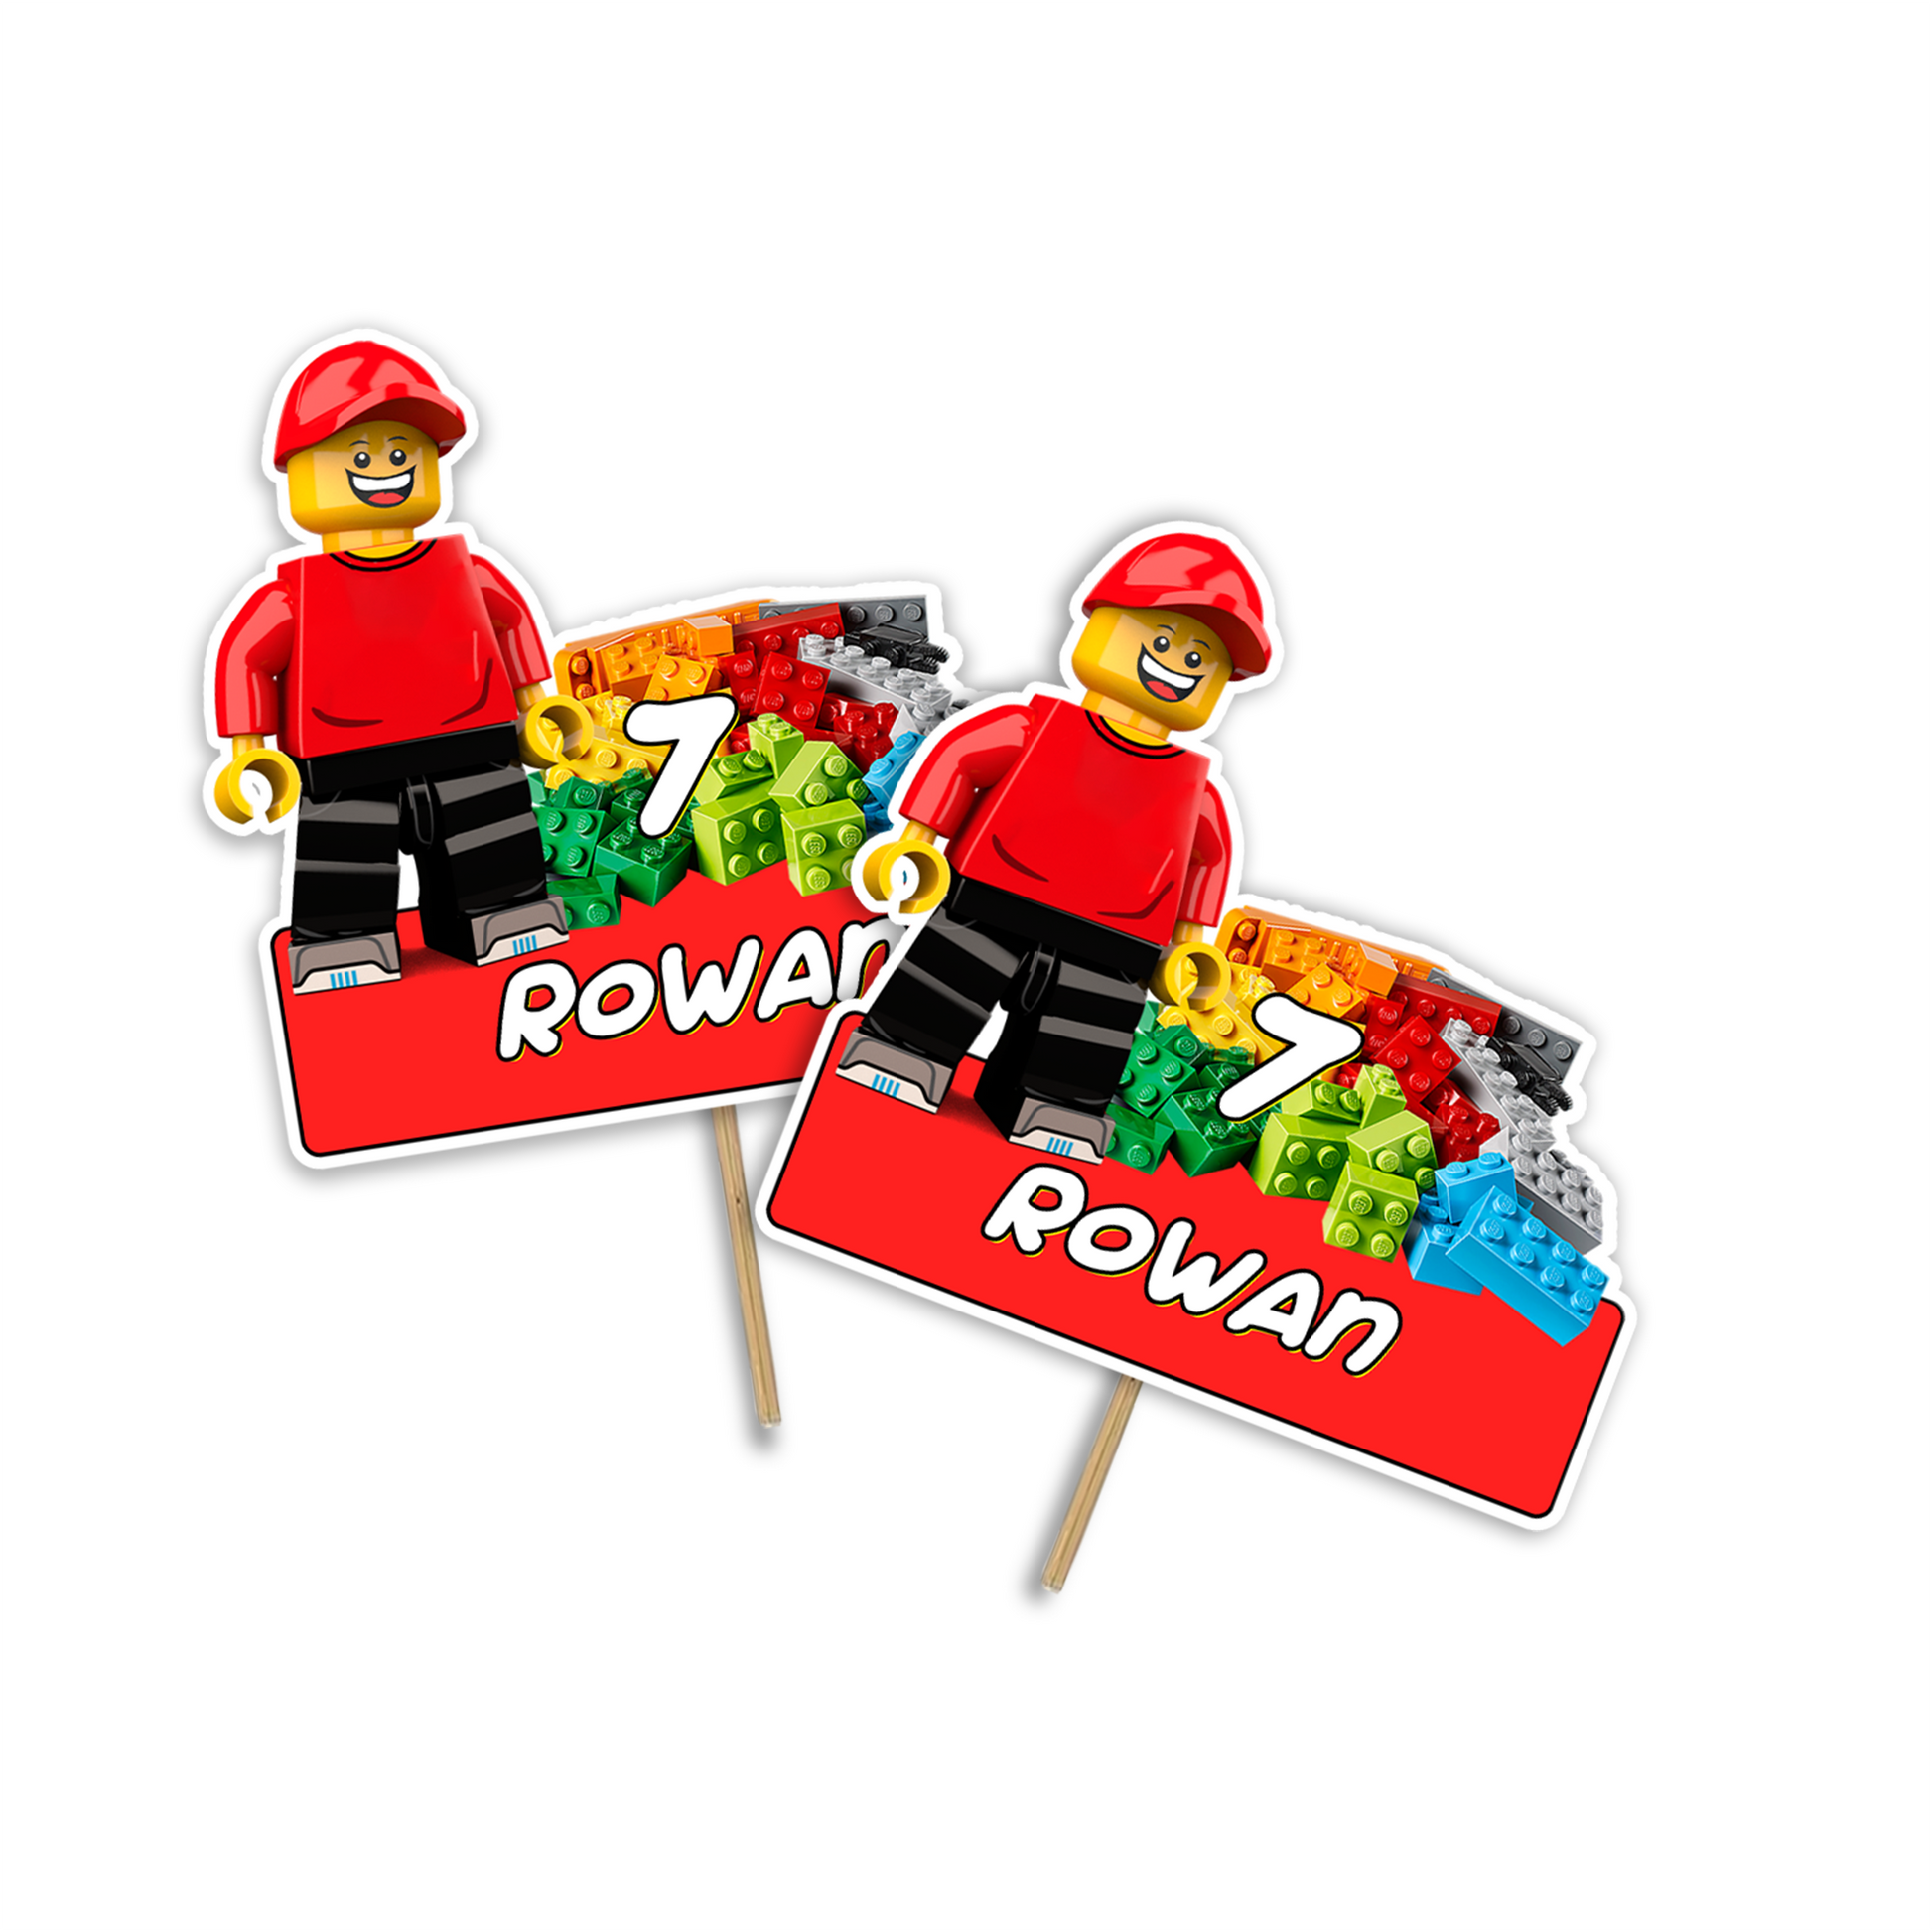 Personalized cake toppers with a Lego, Building Blocks theme